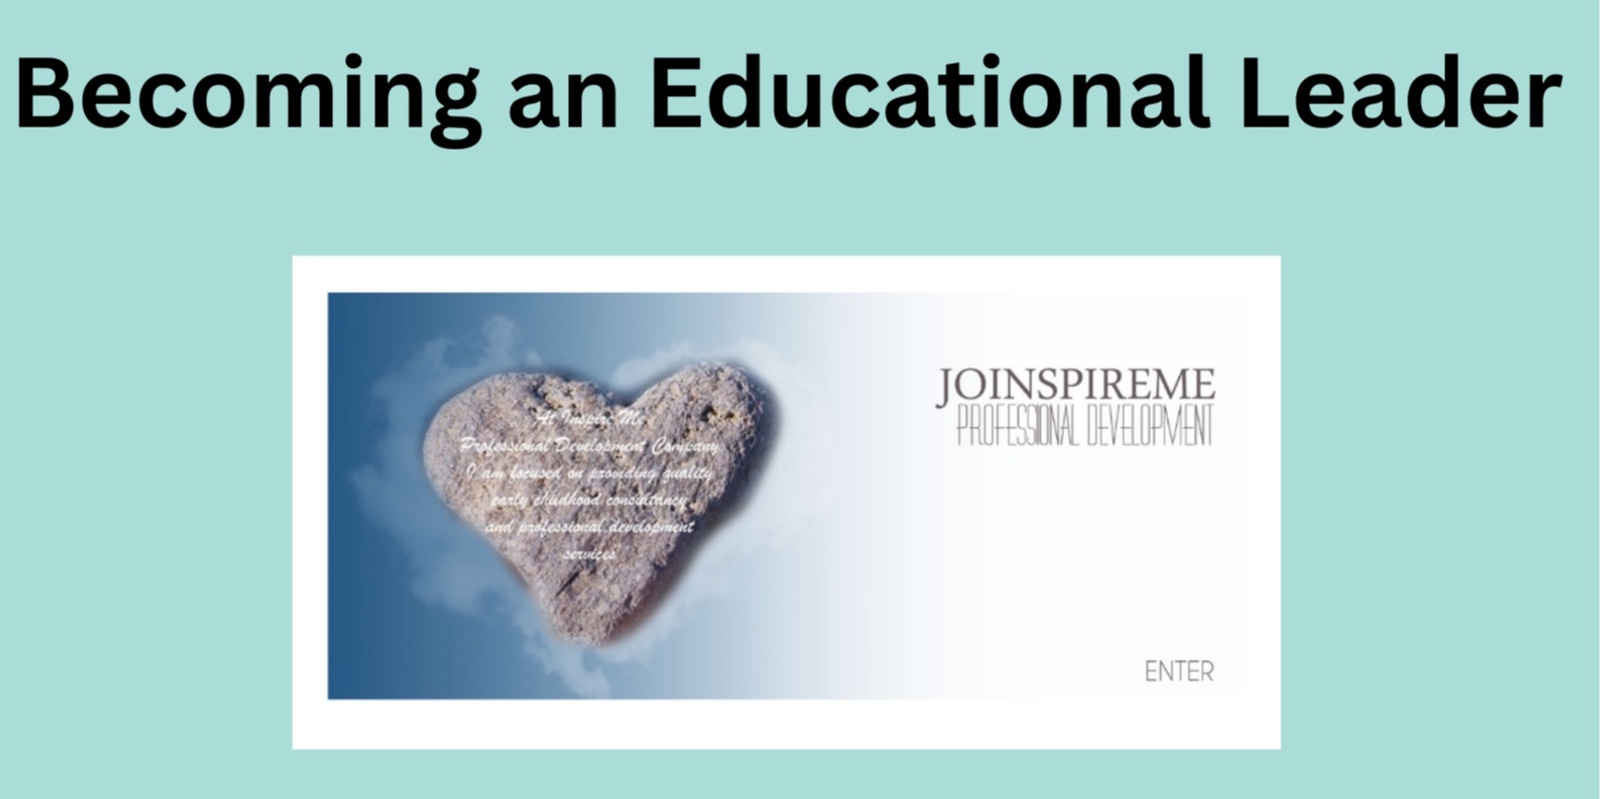 Banner image for Becoming an Educational Leader Coffs Harbour